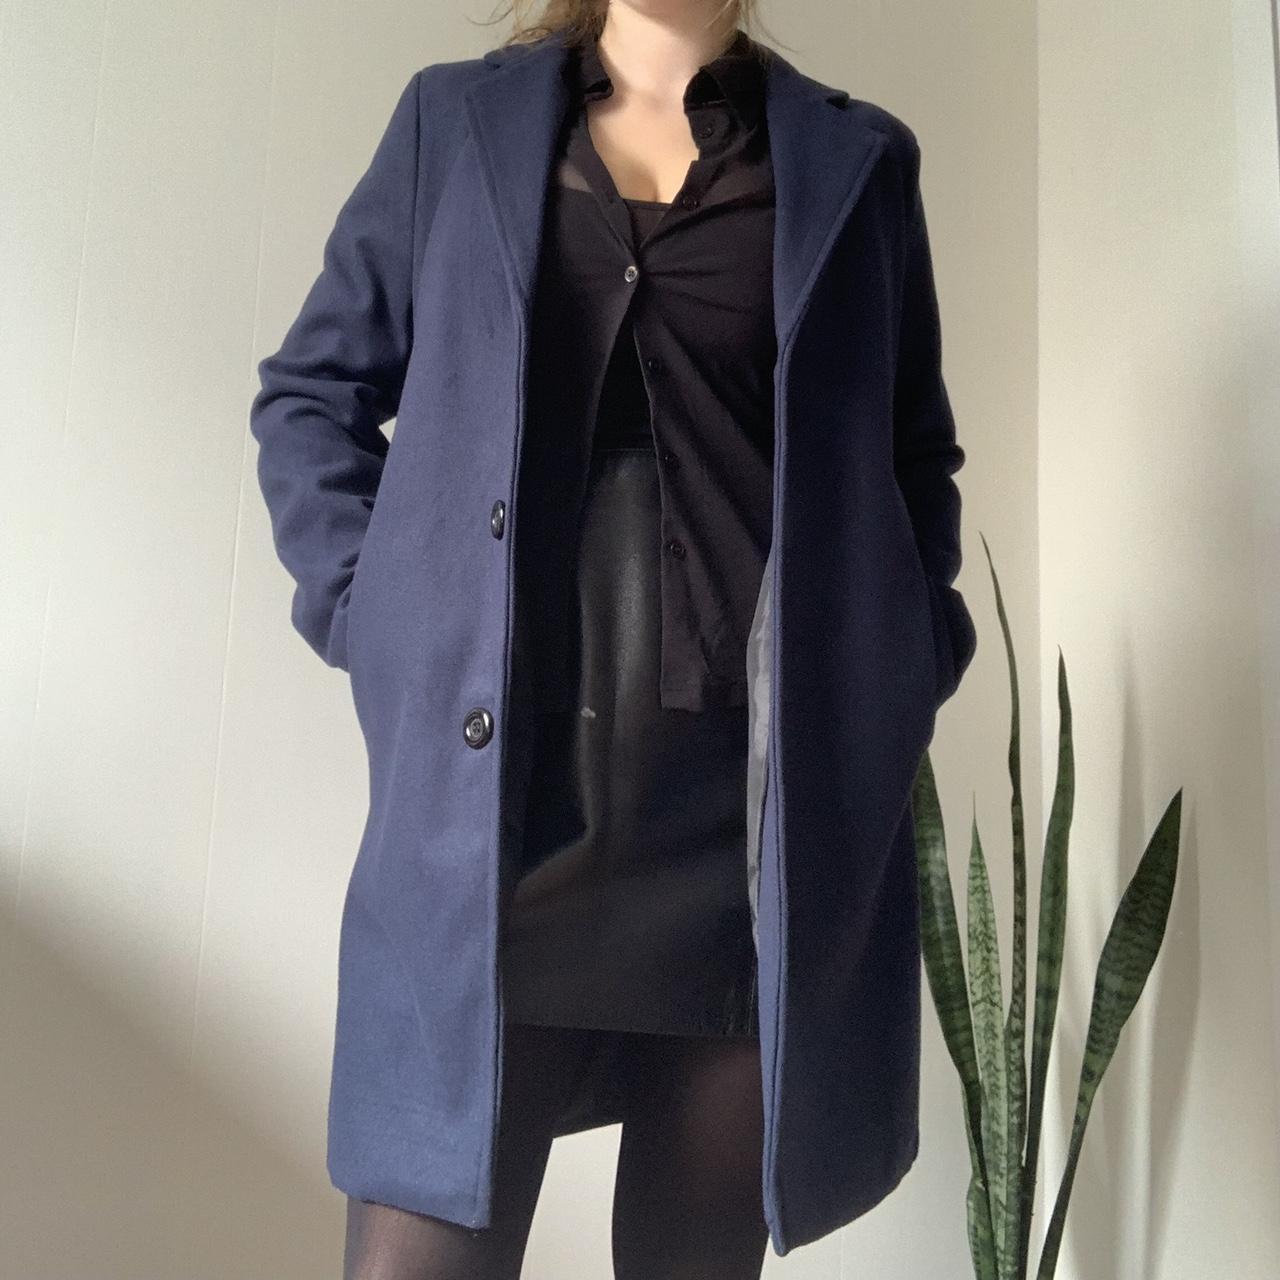 Women's Navy and Blue Jacket